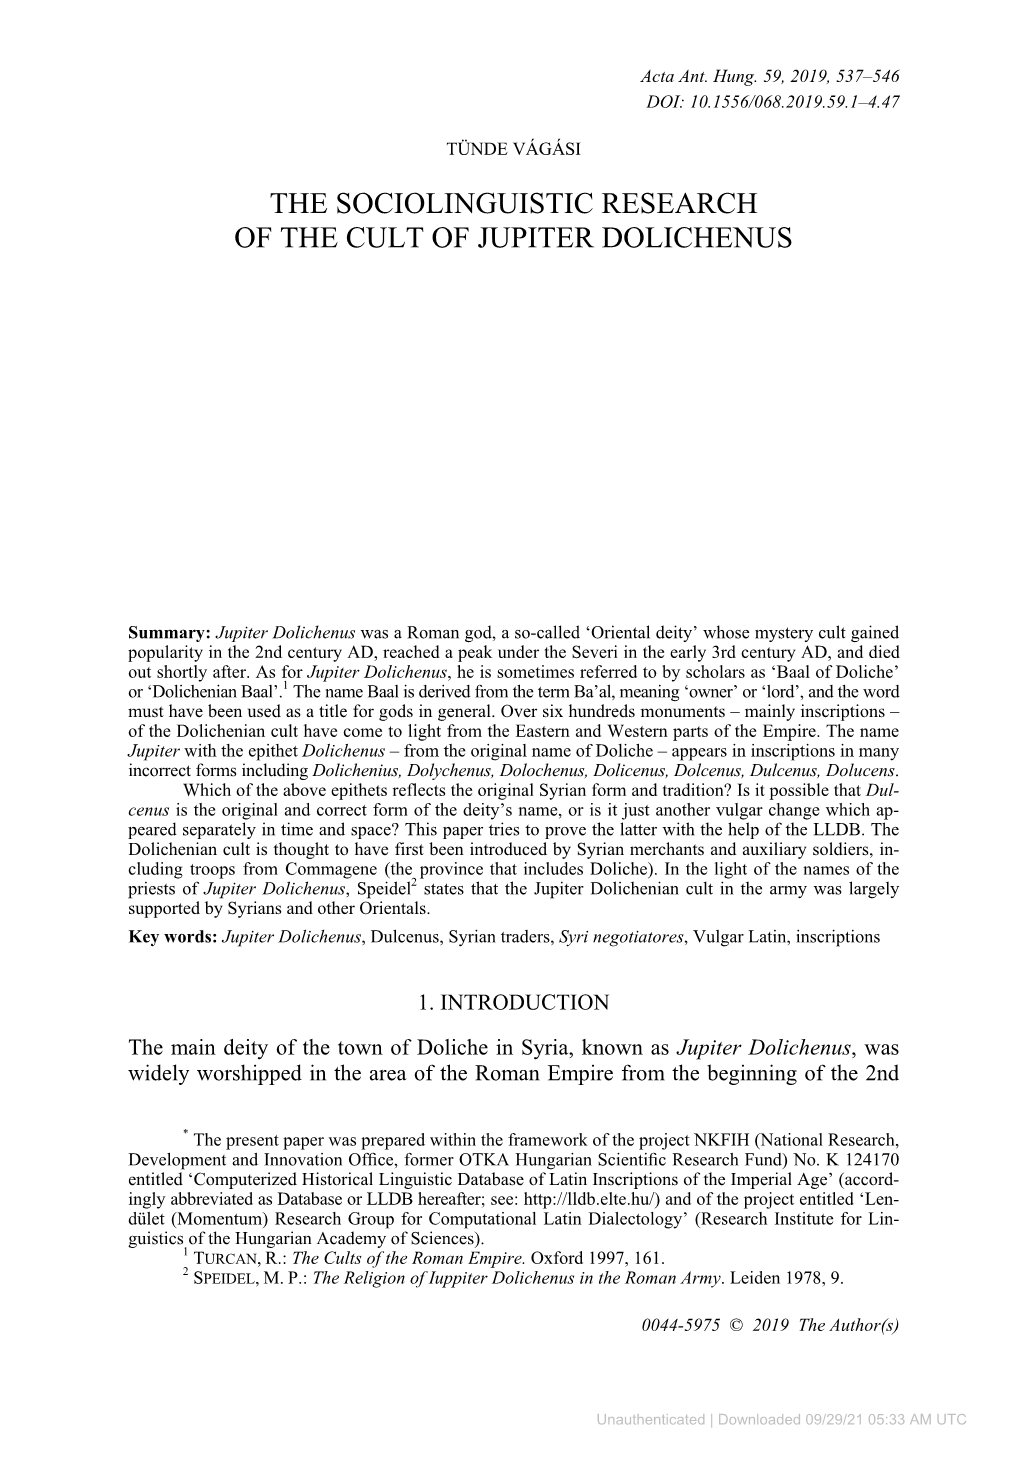 The Sociolinguistic Research of the Cult of Jupiter Dolichenus